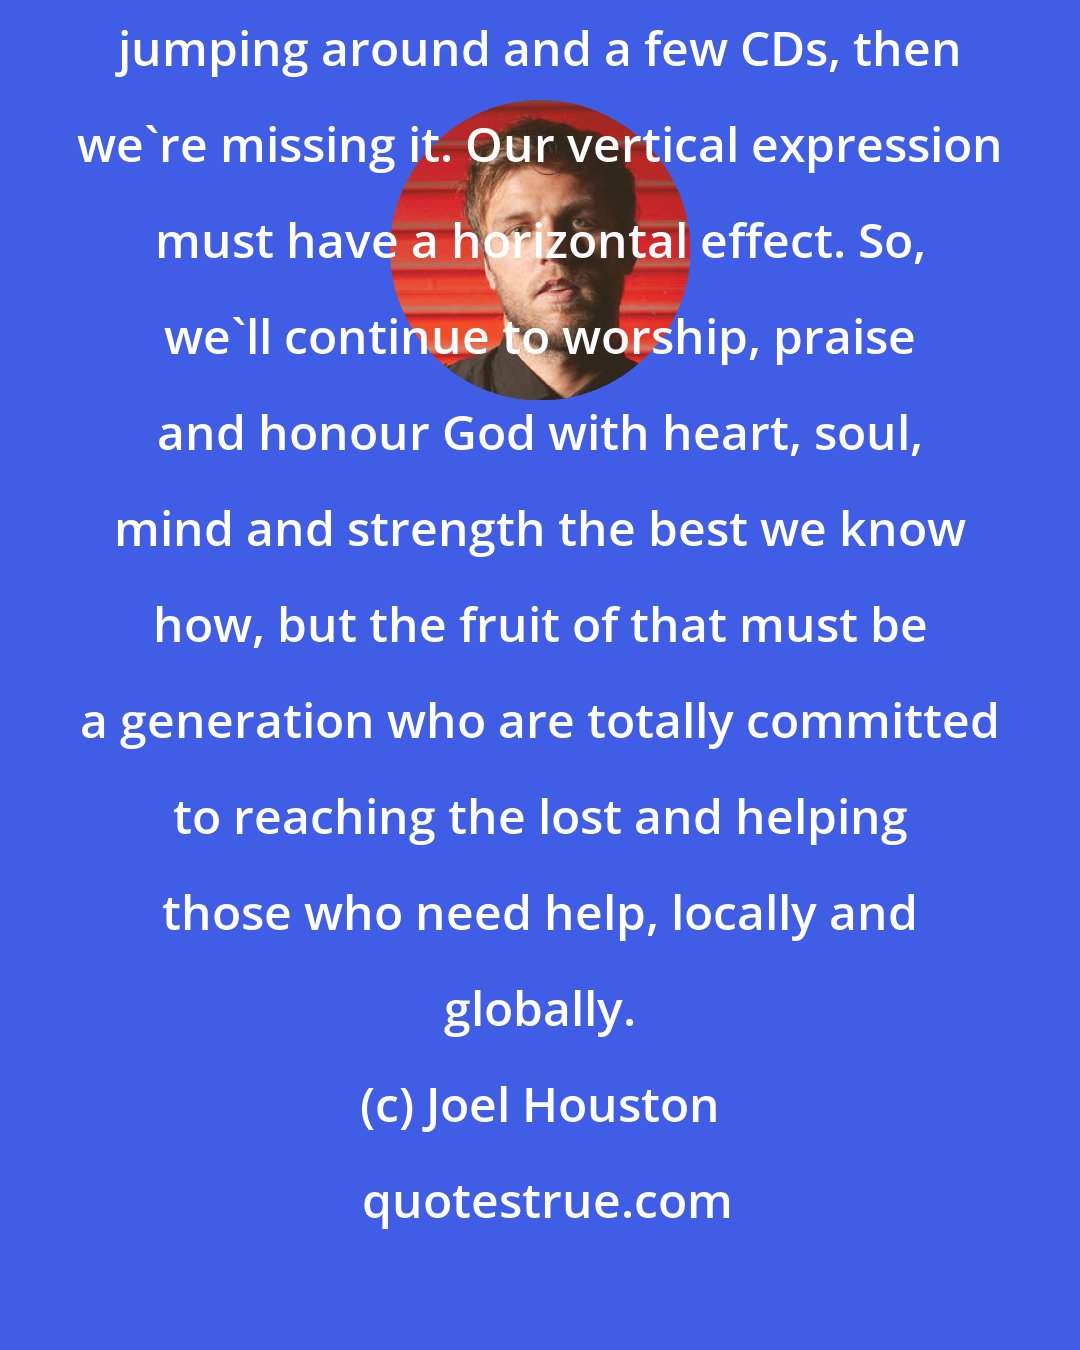 Joel Houston: If our worship is just great youth meetings, nice songs, lots of jumping around and a few CDs, then we're missing it. Our vertical expression must have a horizontal effect. So, we'll continue to worship, praise and honour God with heart, soul, mind and strength the best we know how, but the fruit of that must be a generation who are totally committed to reaching the lost and helping those who need help, locally and globally.